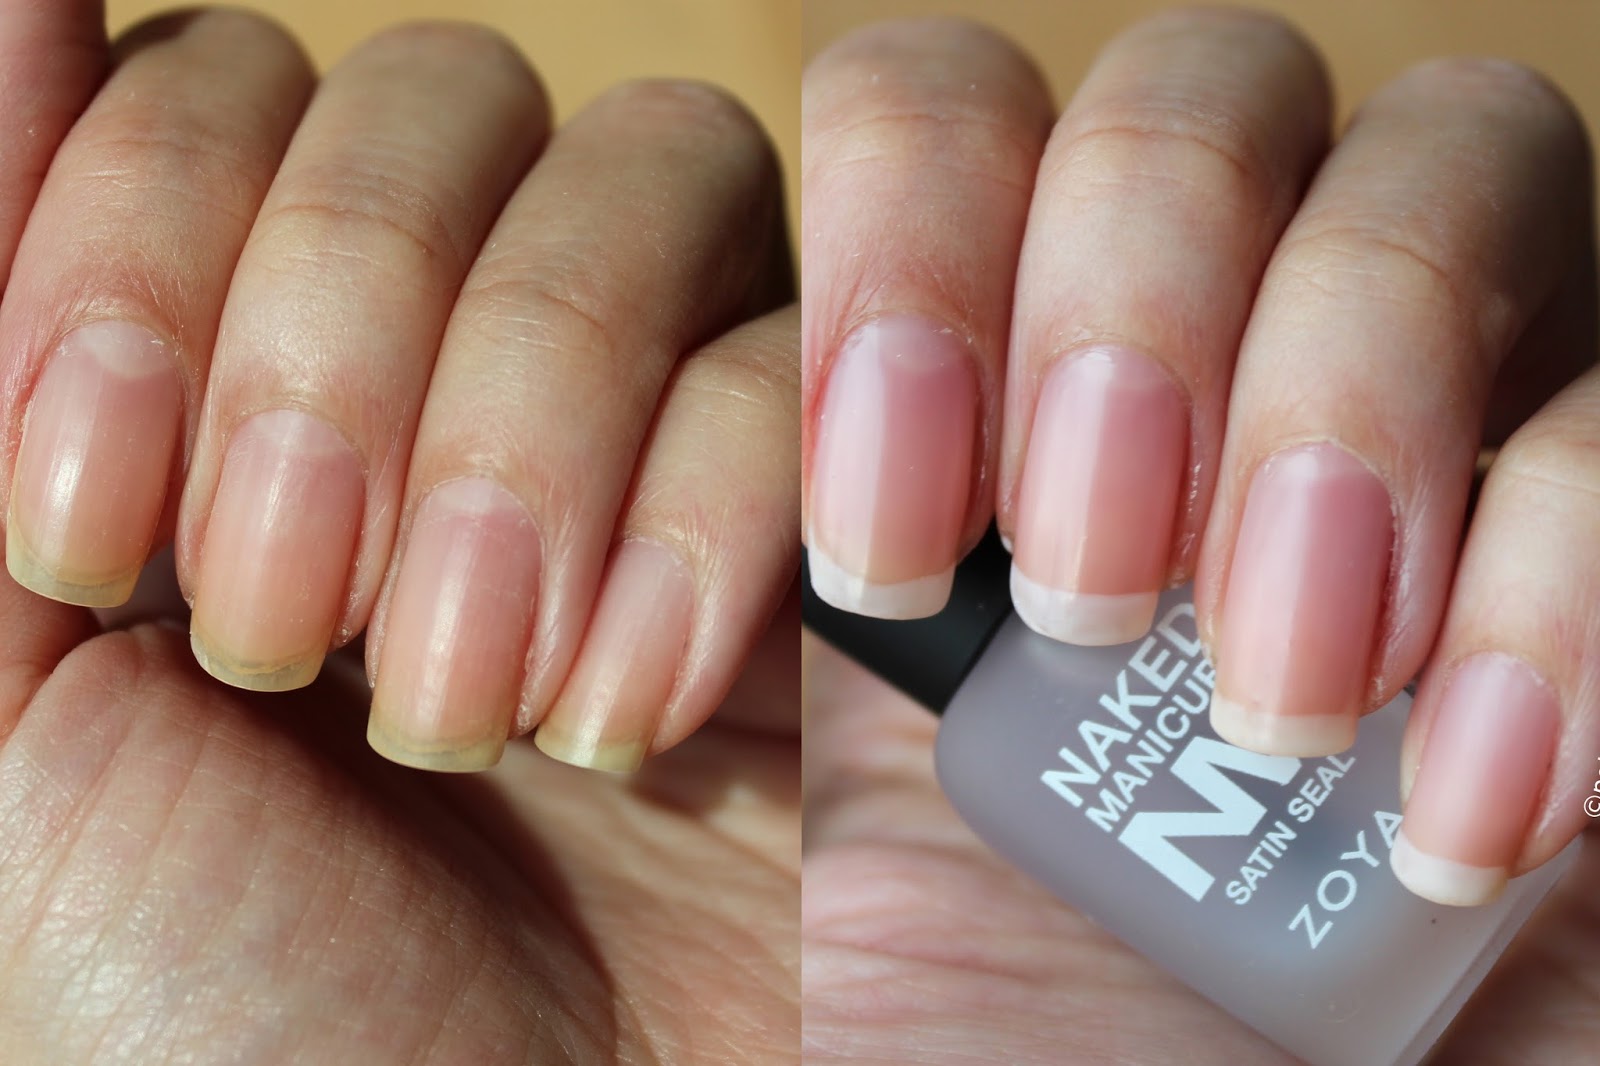 5. Zoya Naked Manicure Perfector, Argan Oil Infused Nail Color - wide 10